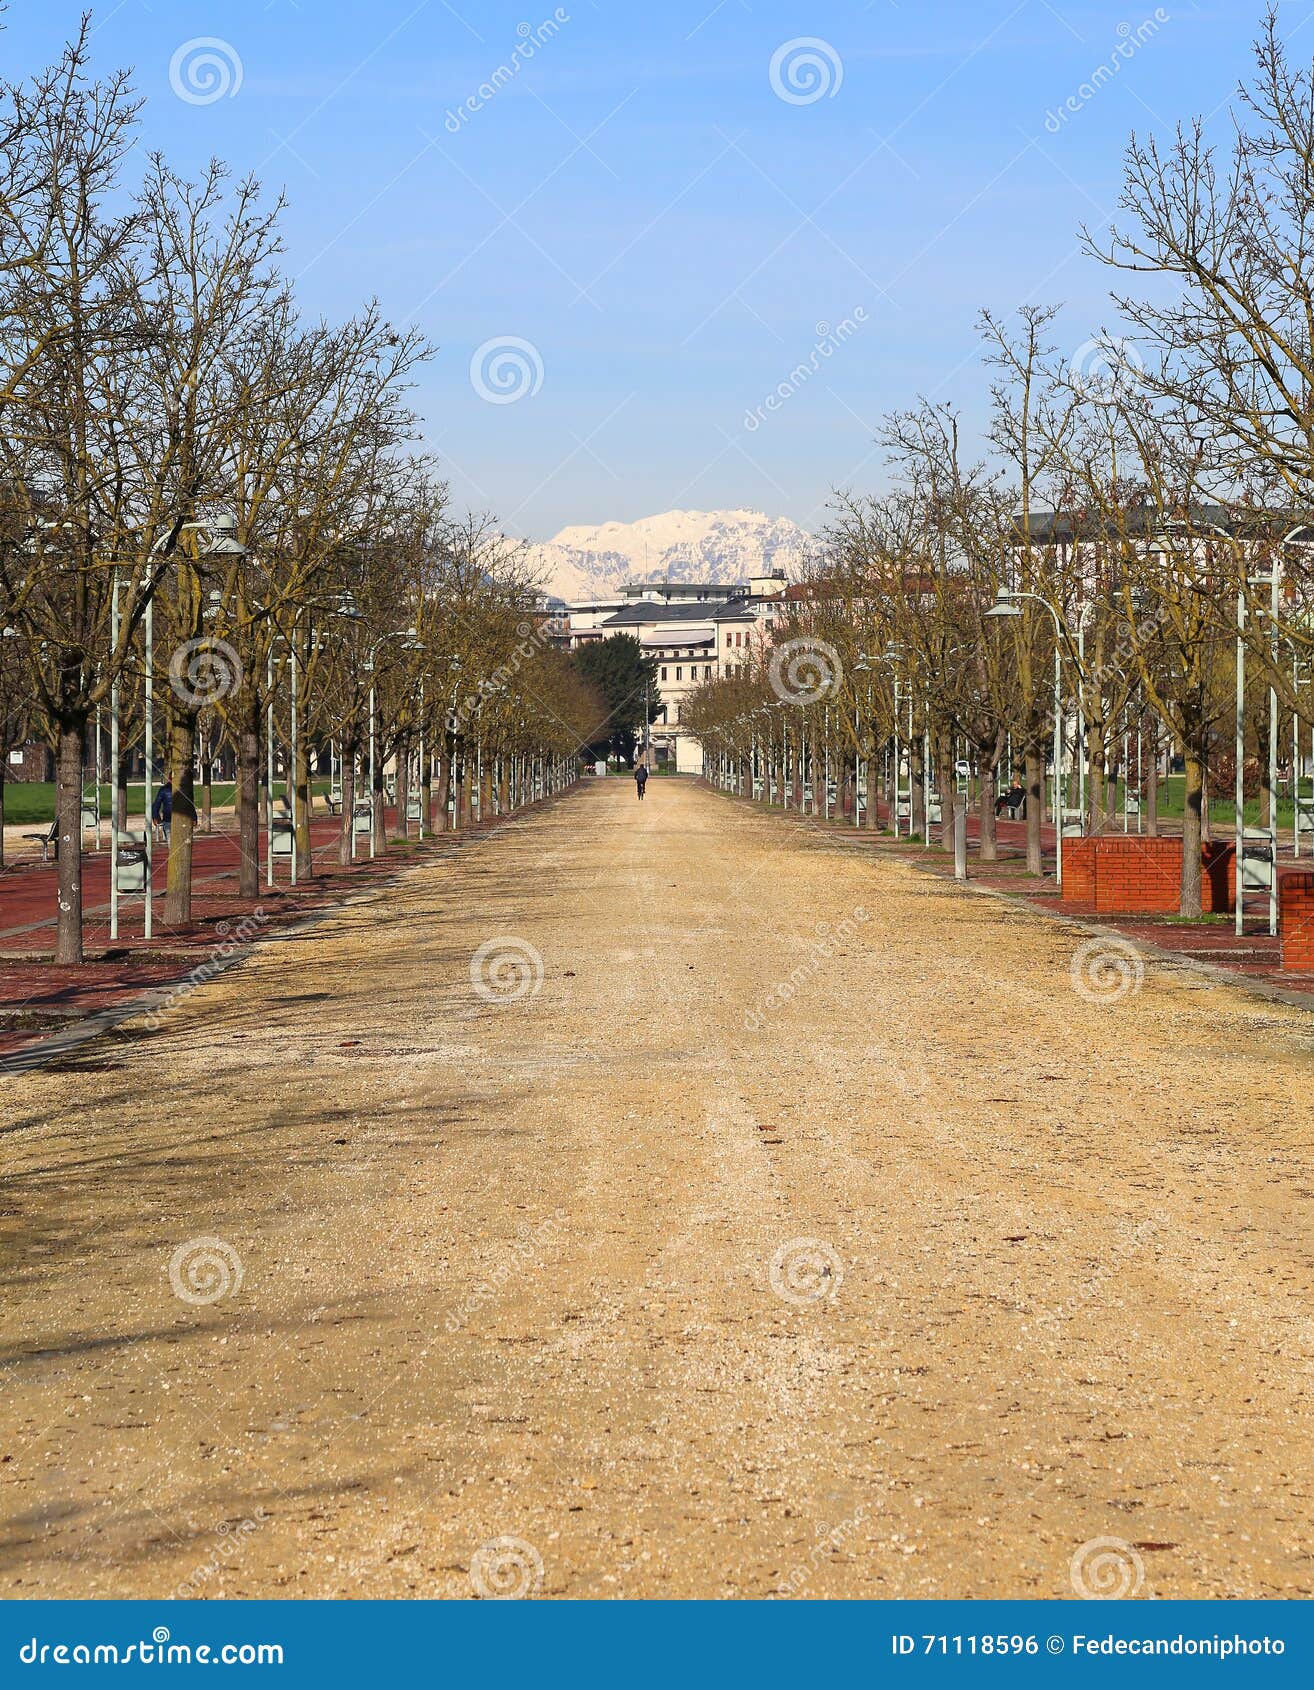 street in the public park called campo marzo in vicenza, italy